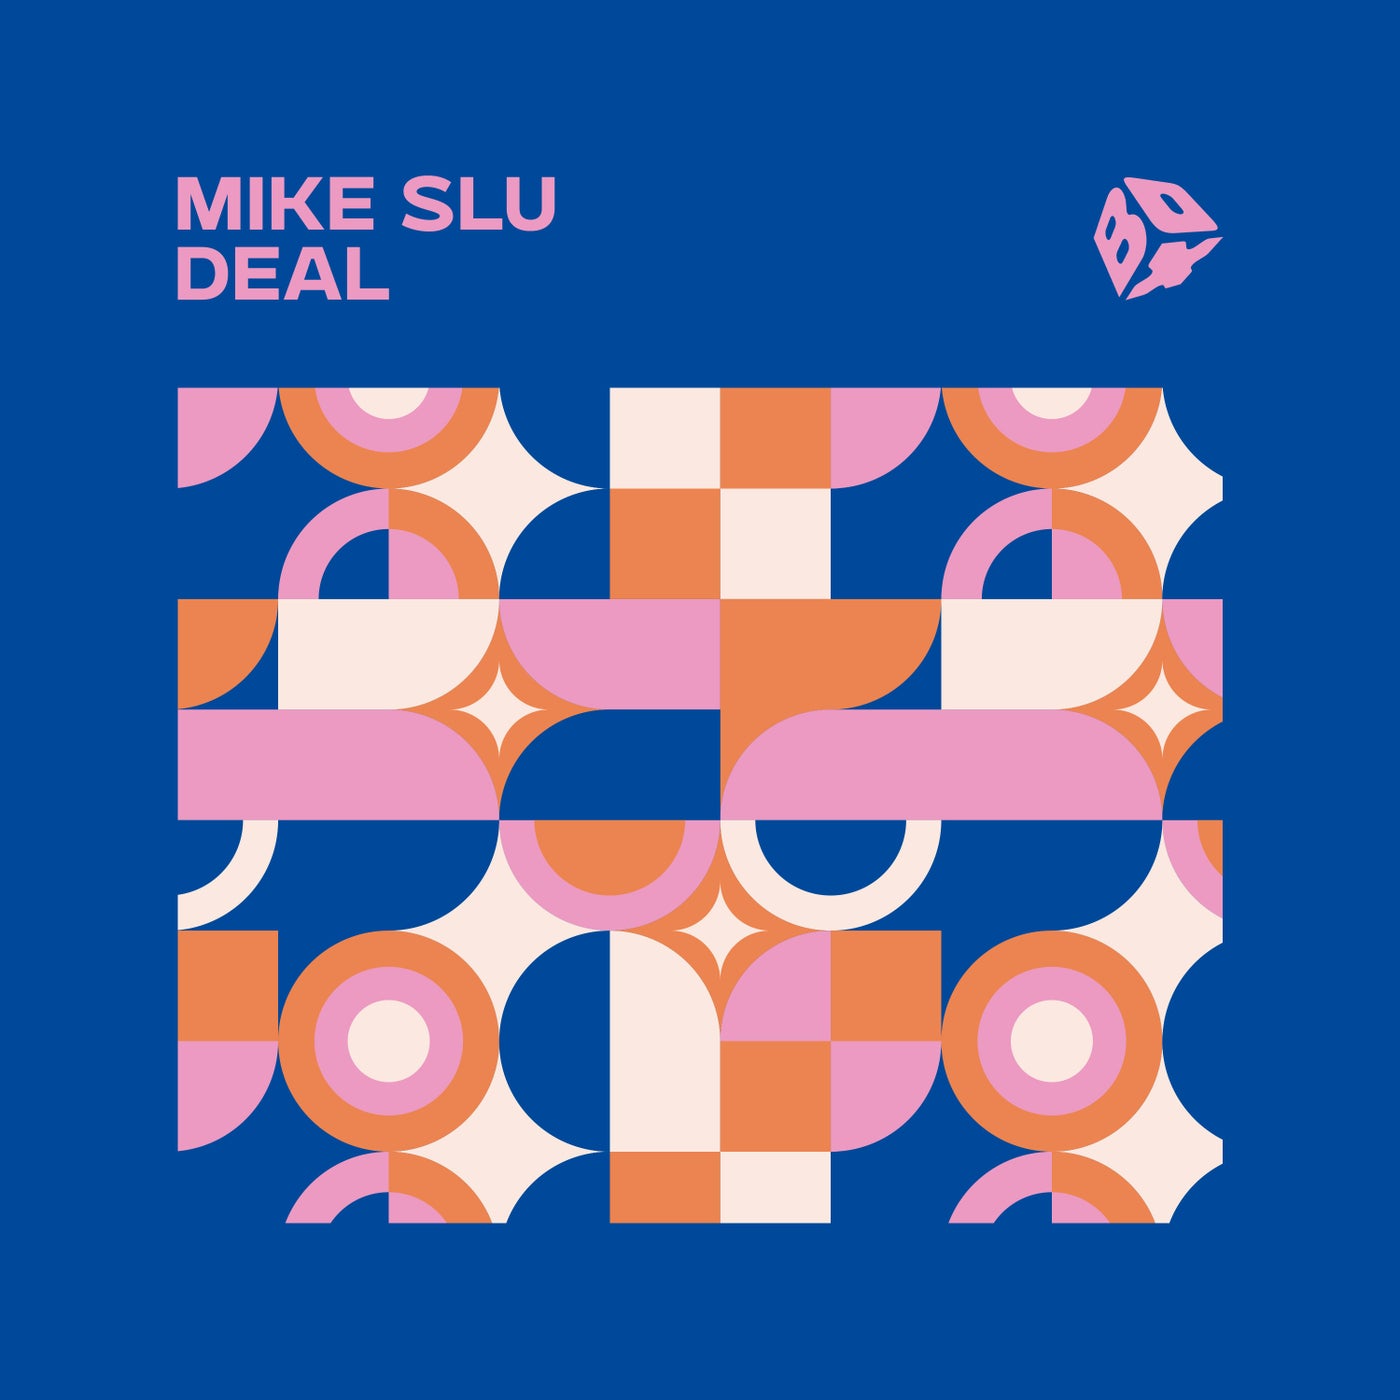 Deal (Extended Mix)